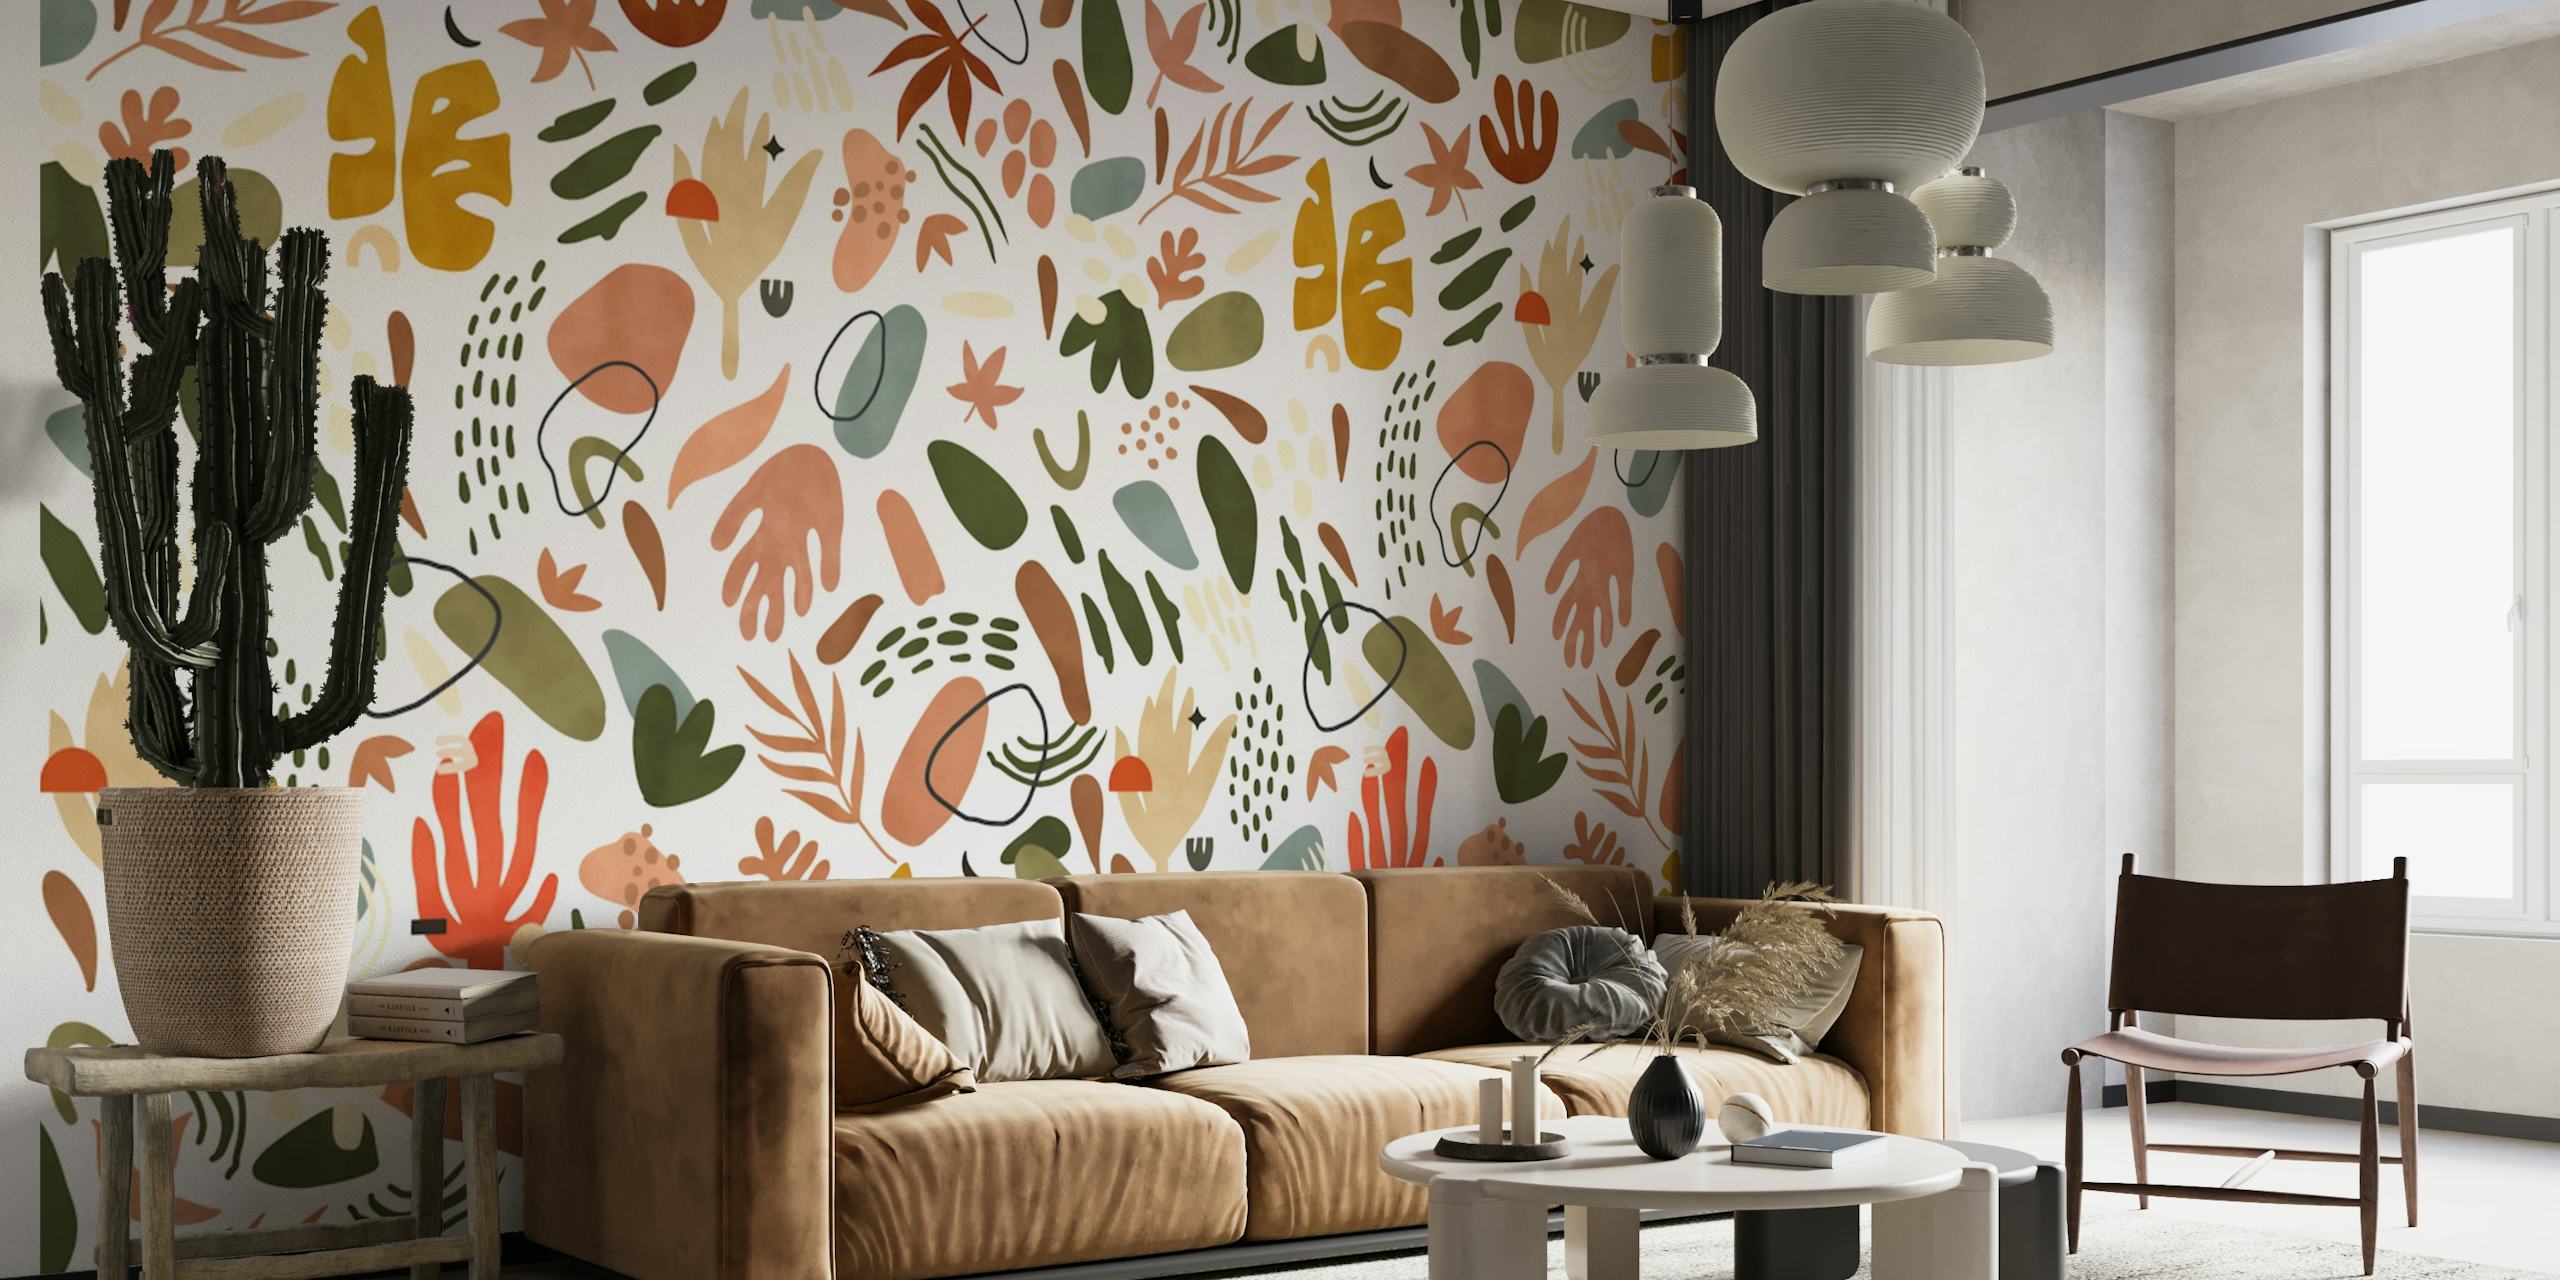 Abstract botanical elements wall mural with earthy tones